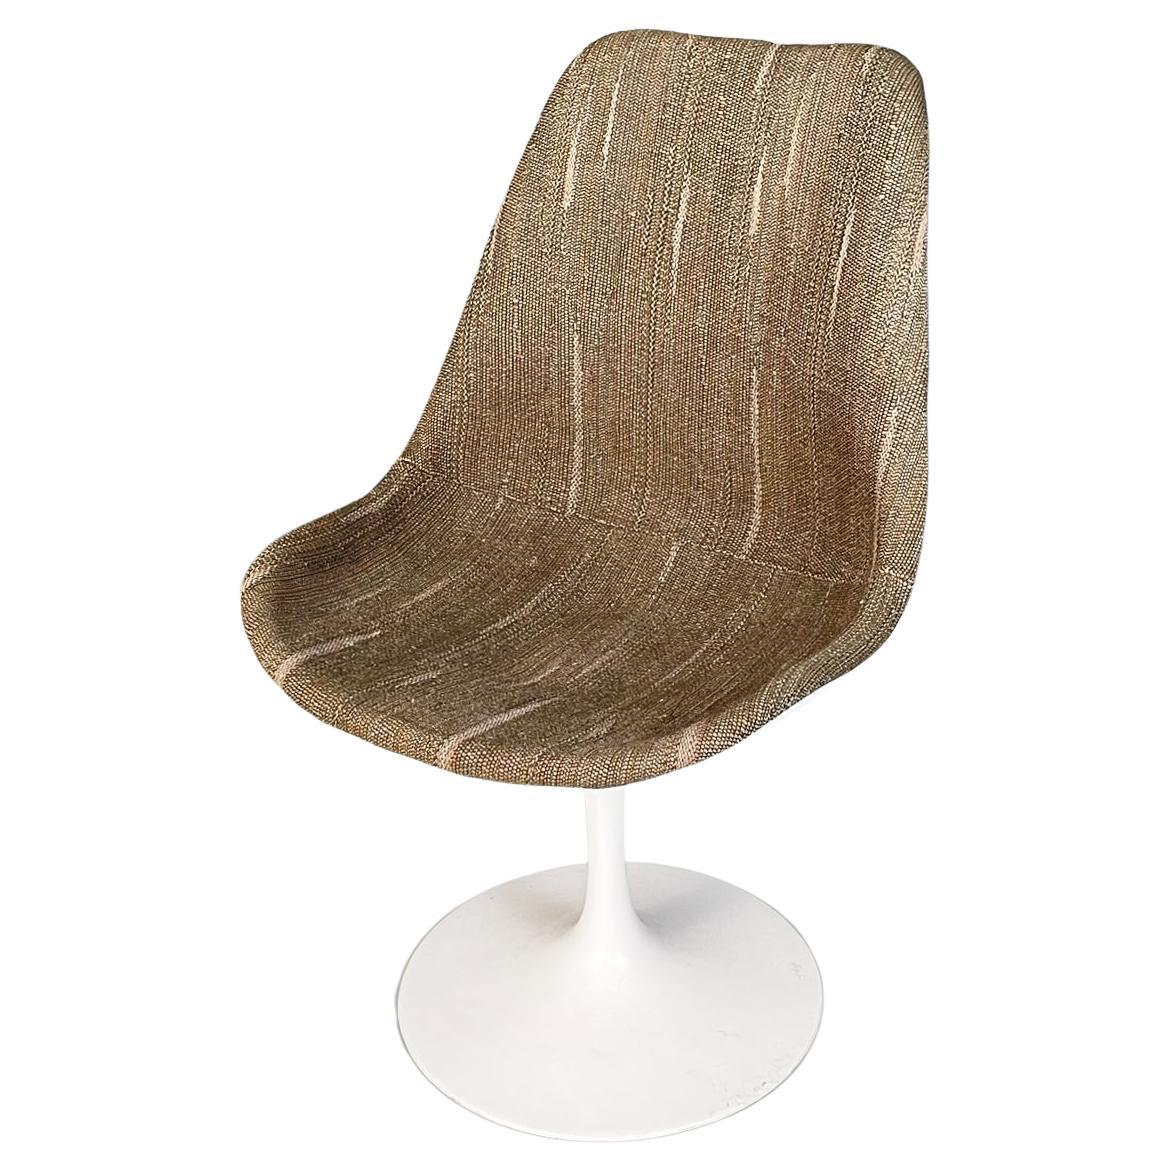 American Space Age Brown Fabric Tulip Chair by Eero Saarinen for Knoll, 1970s